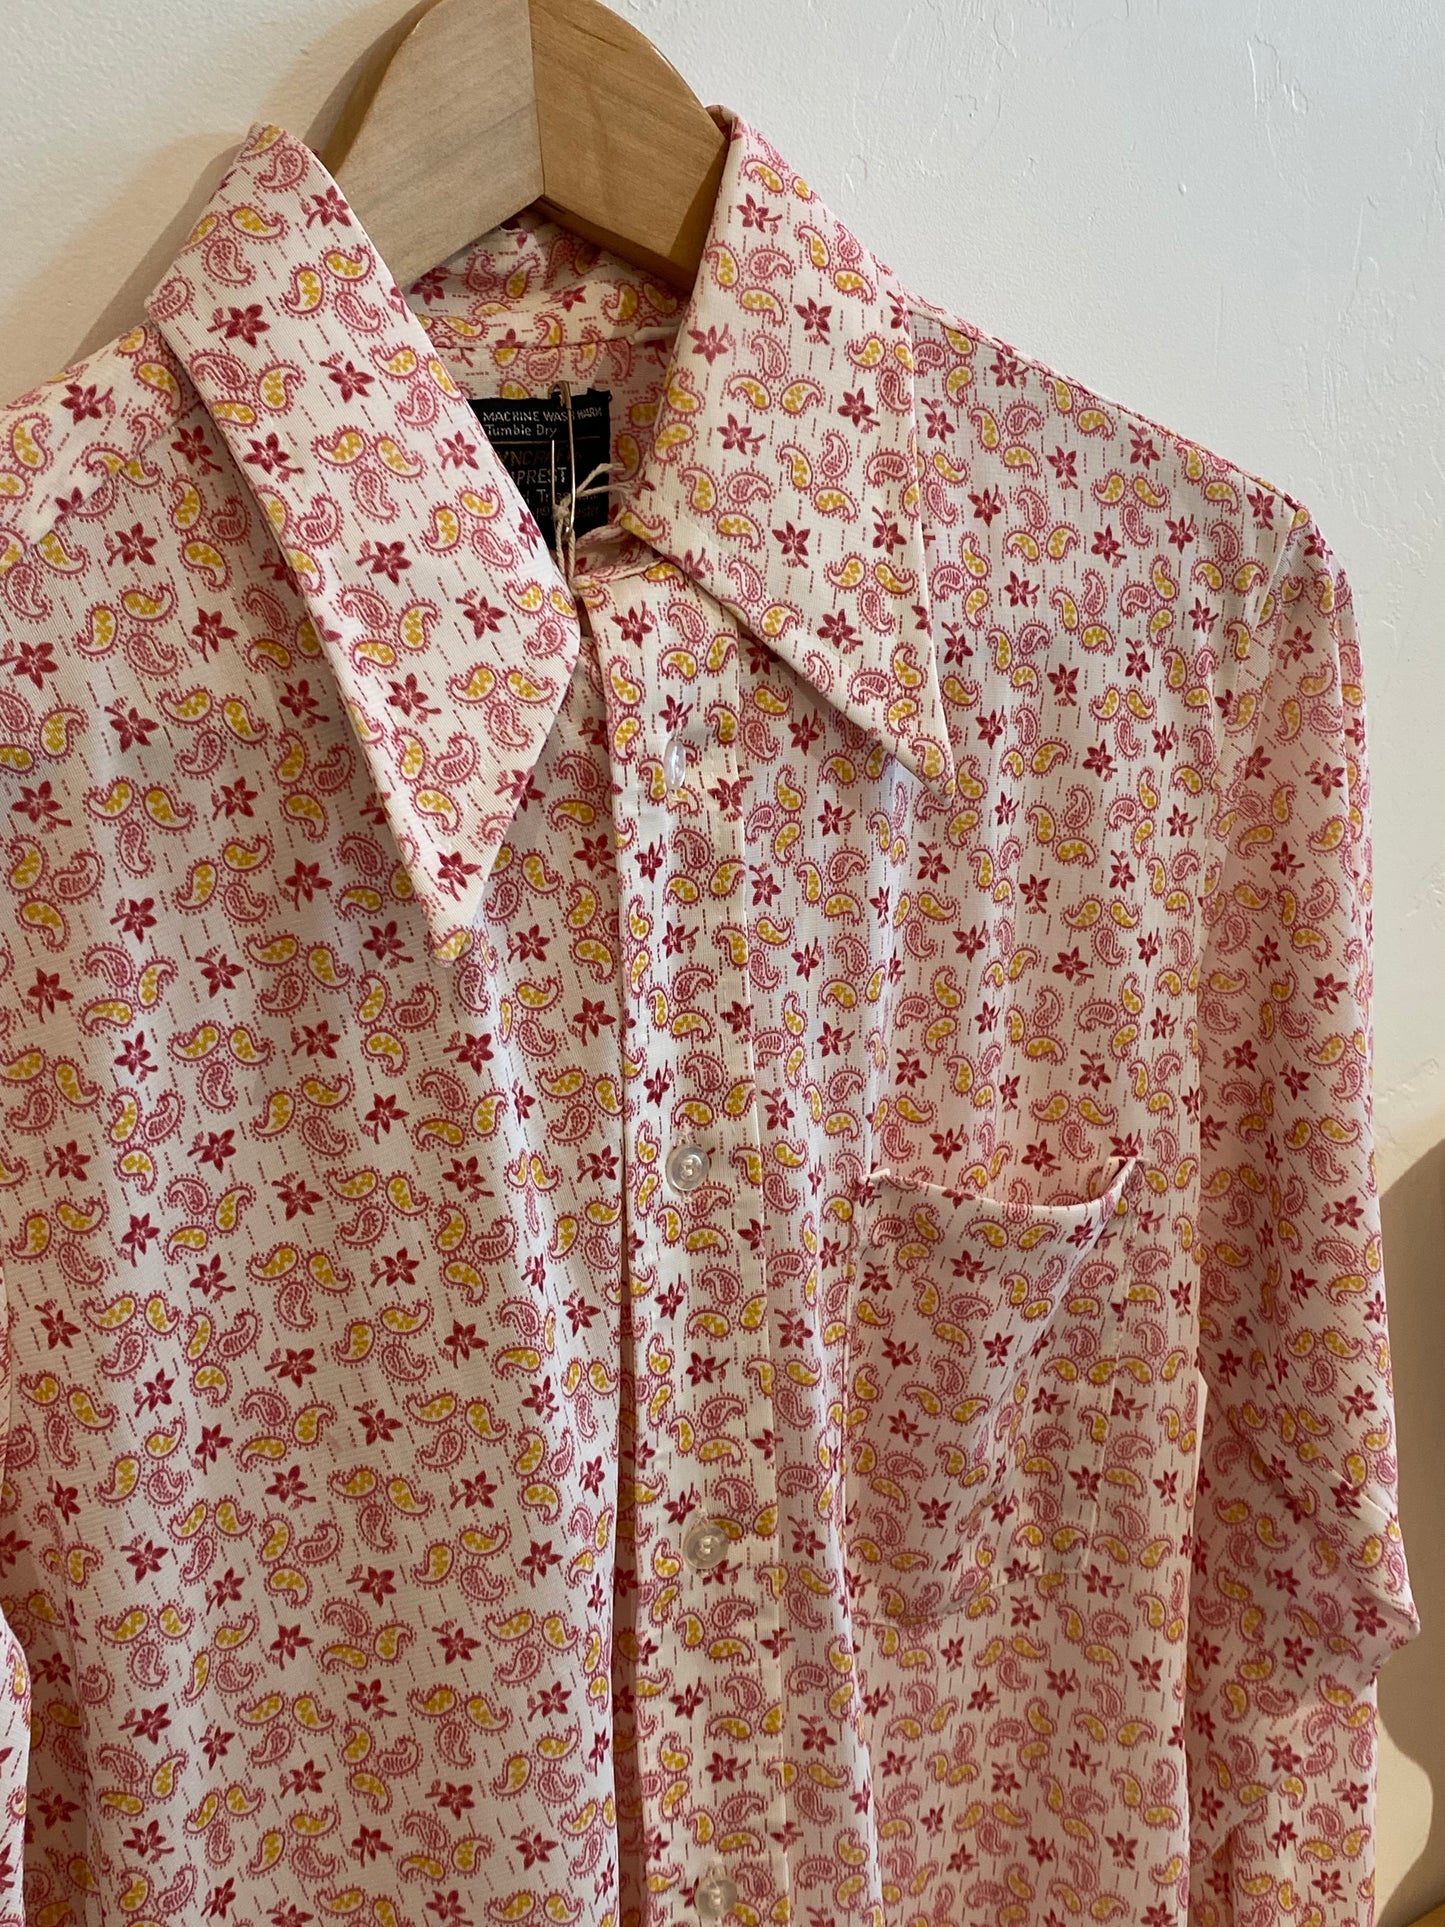 1970s JcPenney's Paisley-Patterned Shirt